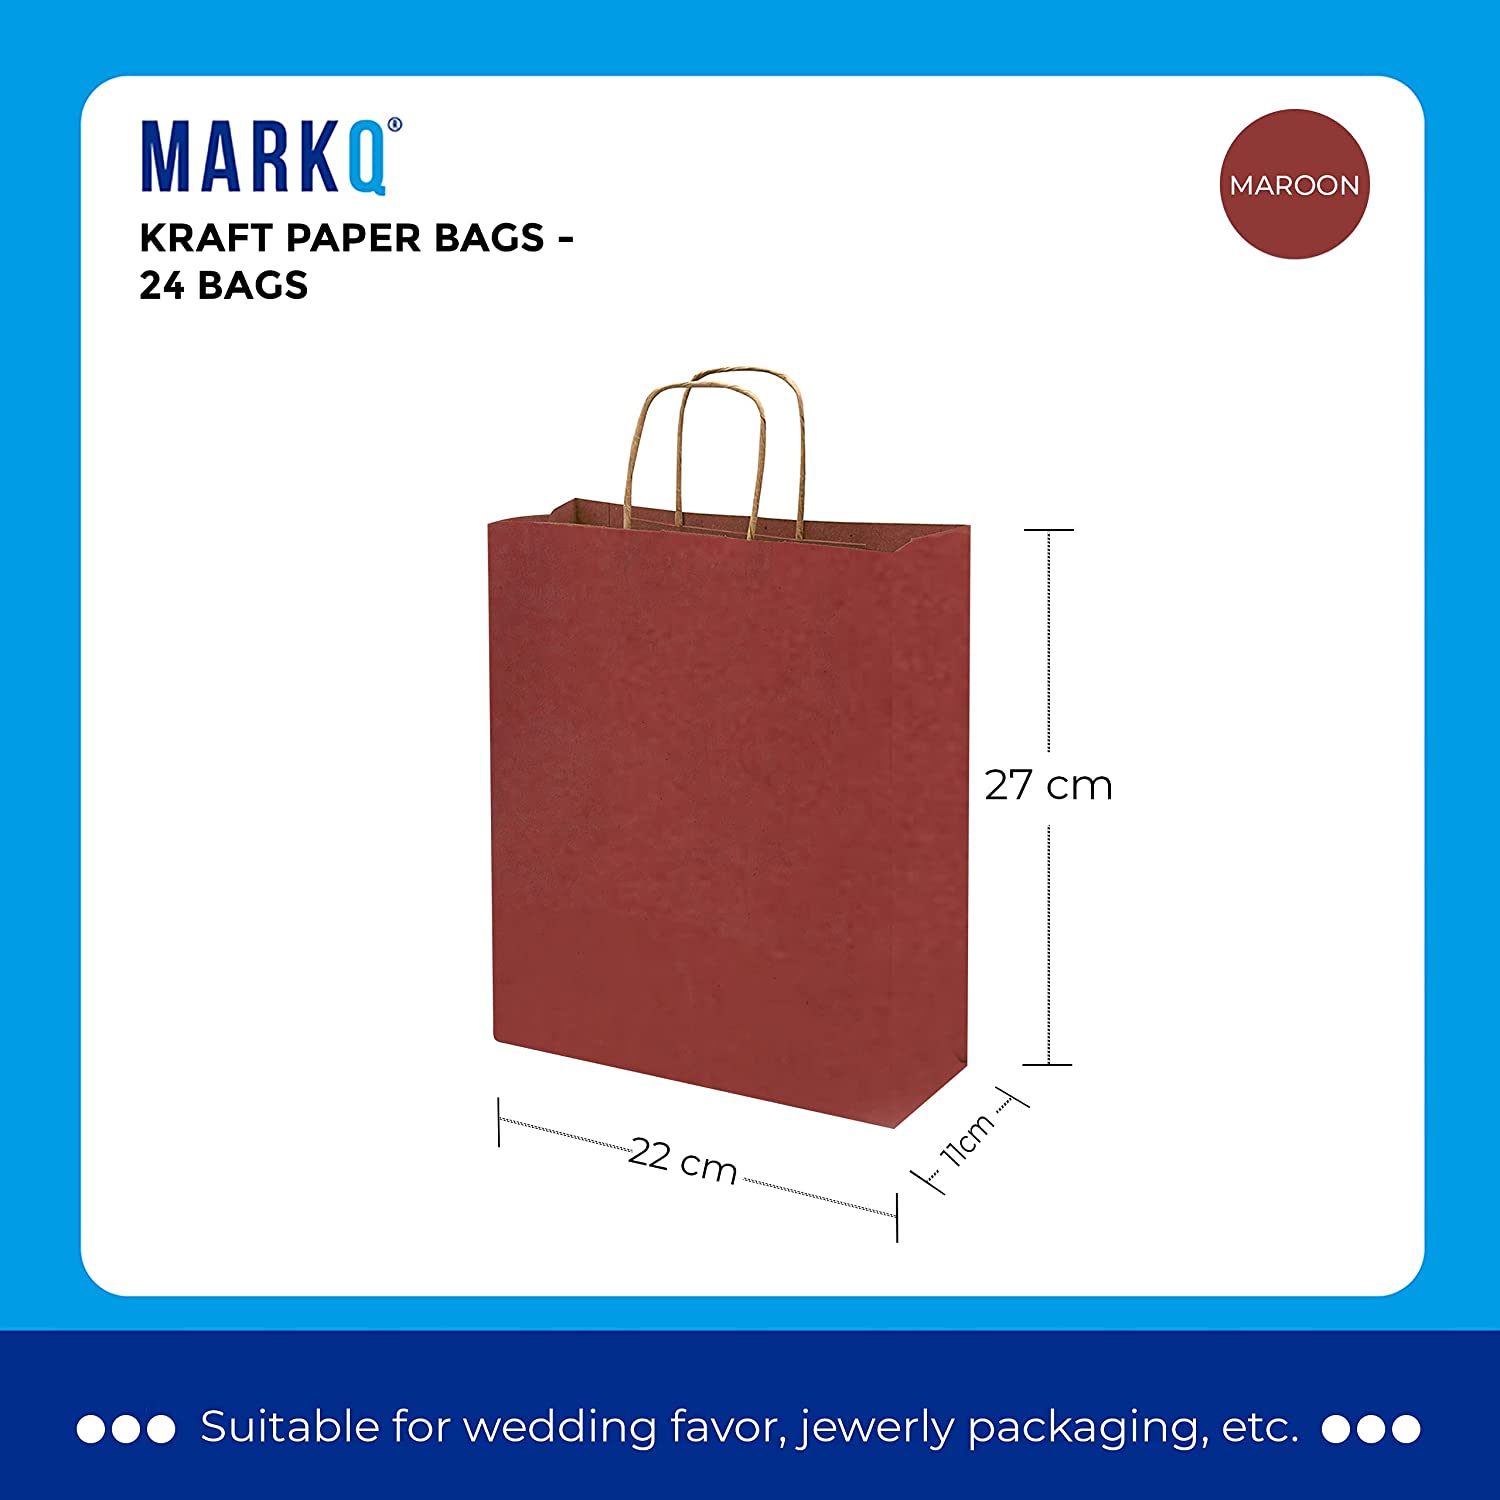 Markq Maroon Paper bags with handles 27 x 22 x 11 cm Large Kraft Gift bags for Birthday Party Favors, Weddings, Retail, Baby Shower (12 Bags)